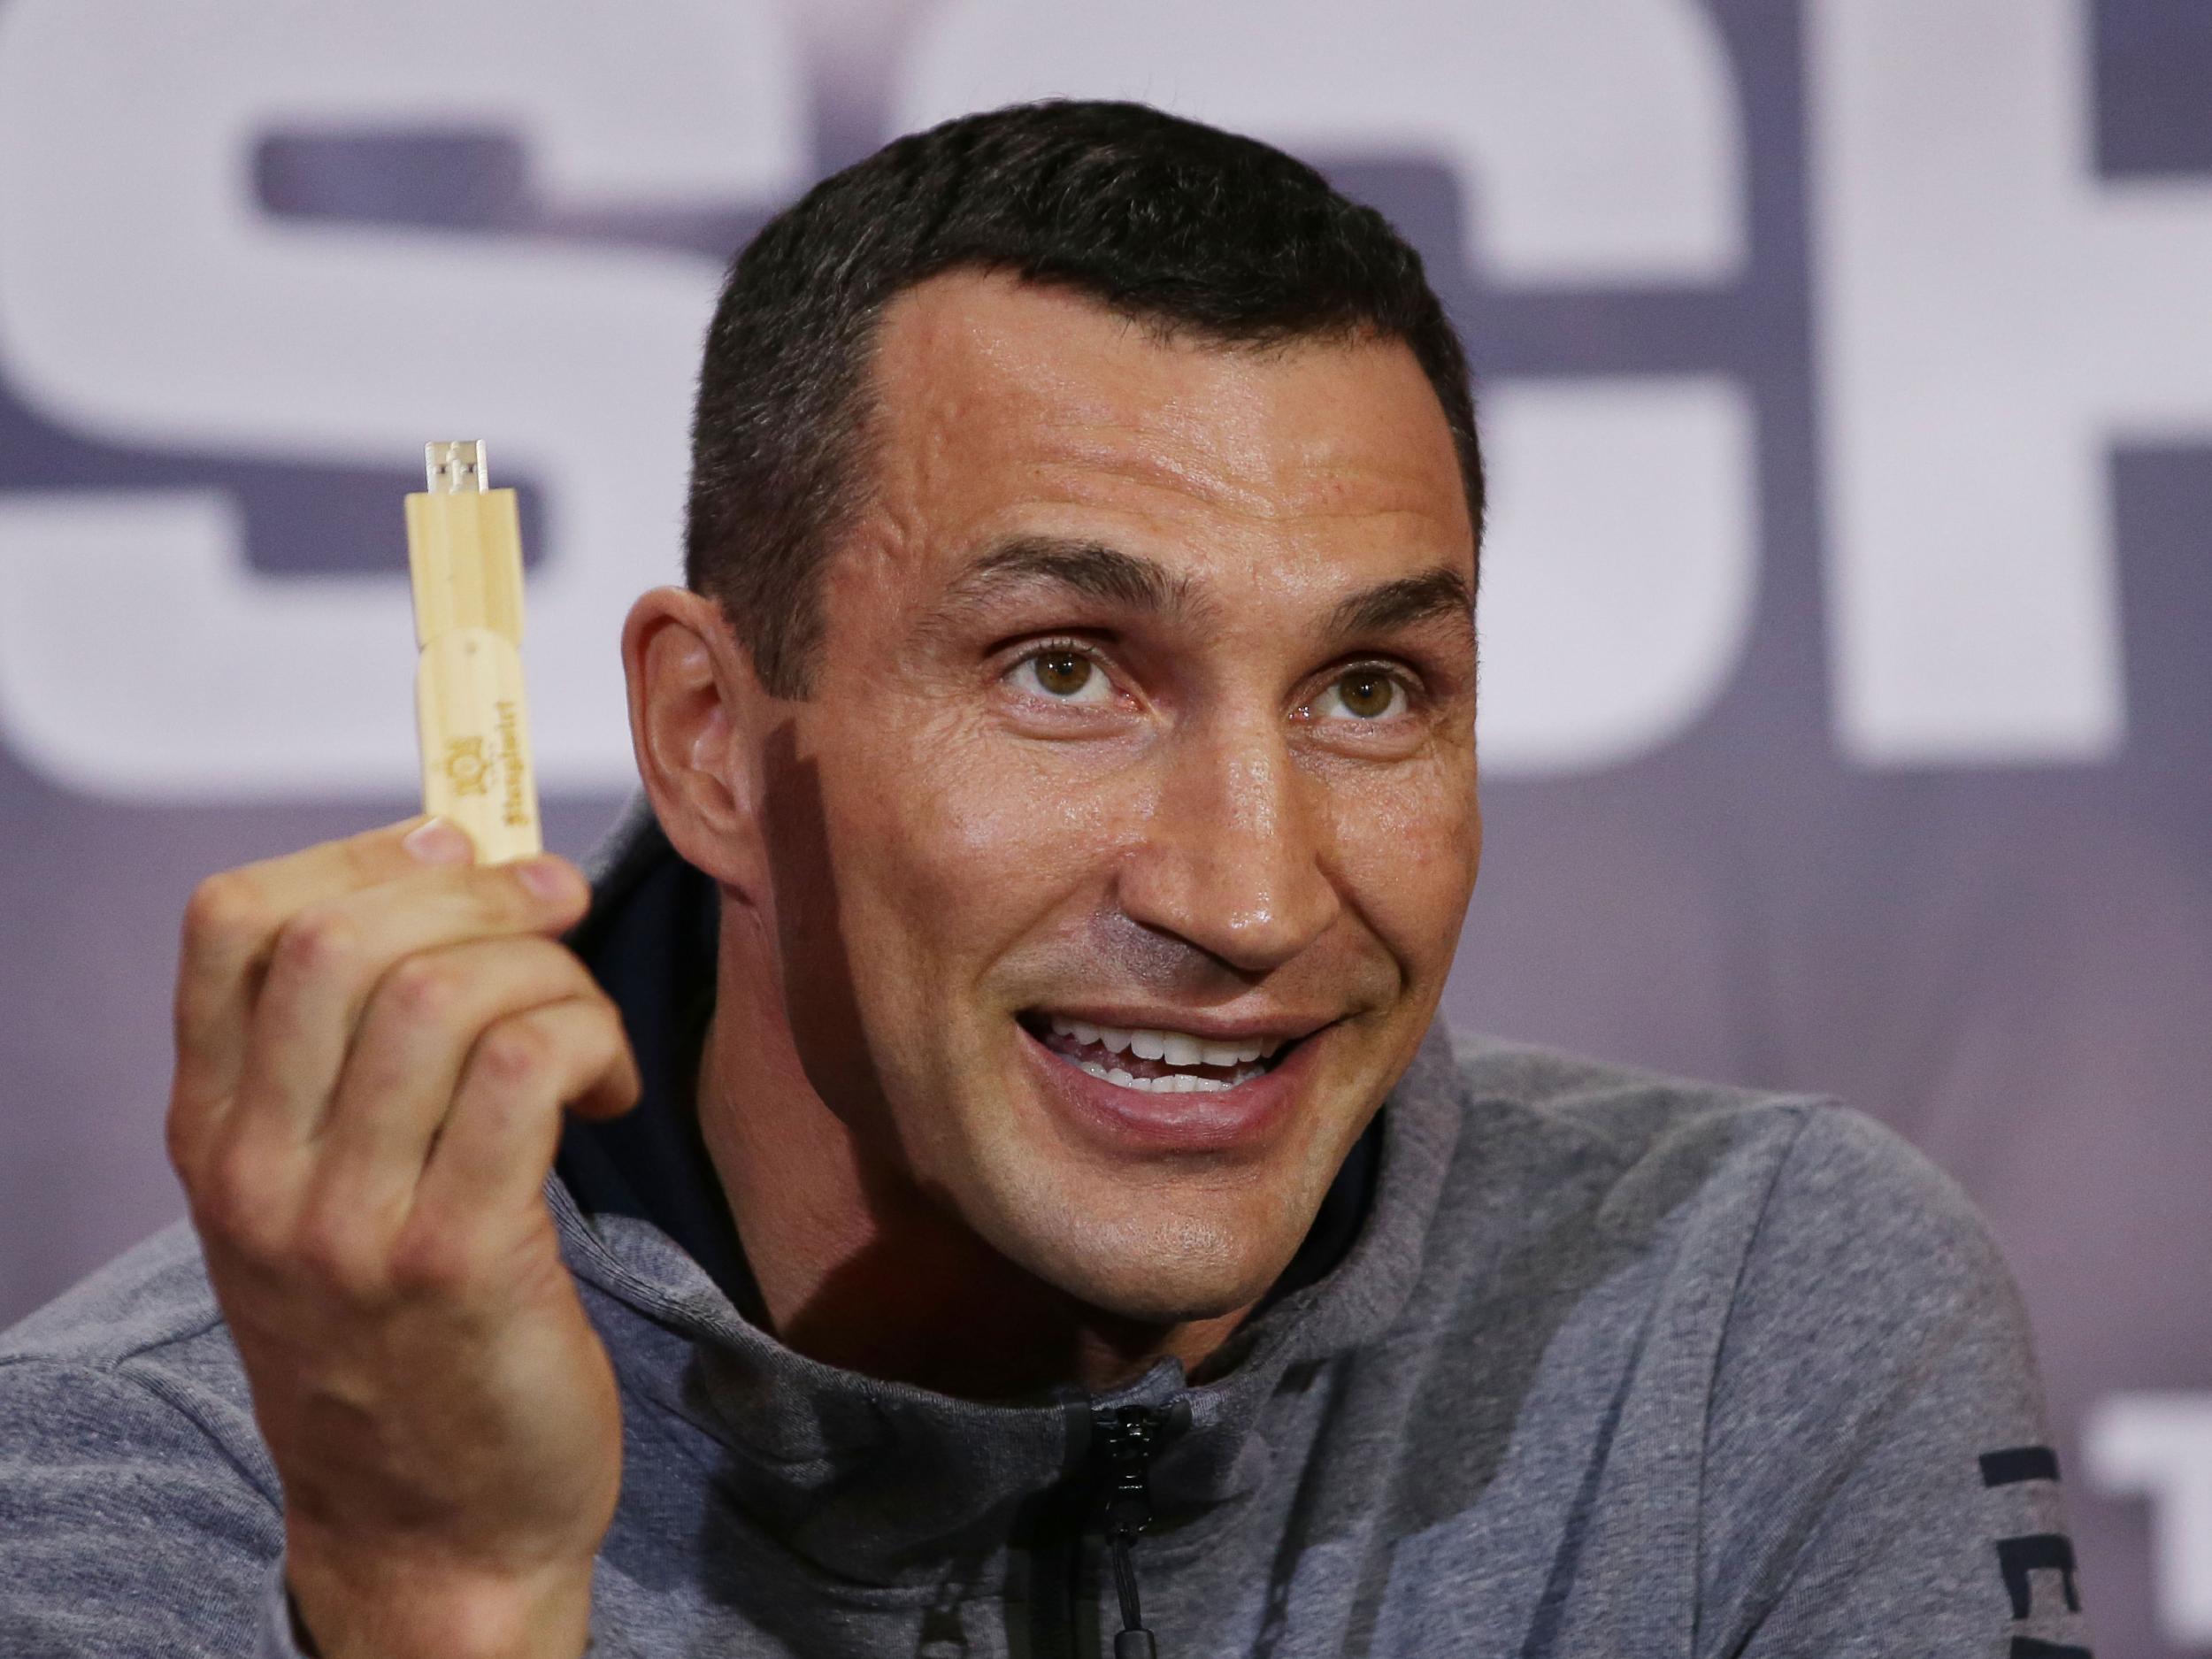 Wladimir Klitschko brandishes a USB drive with his fight prediction